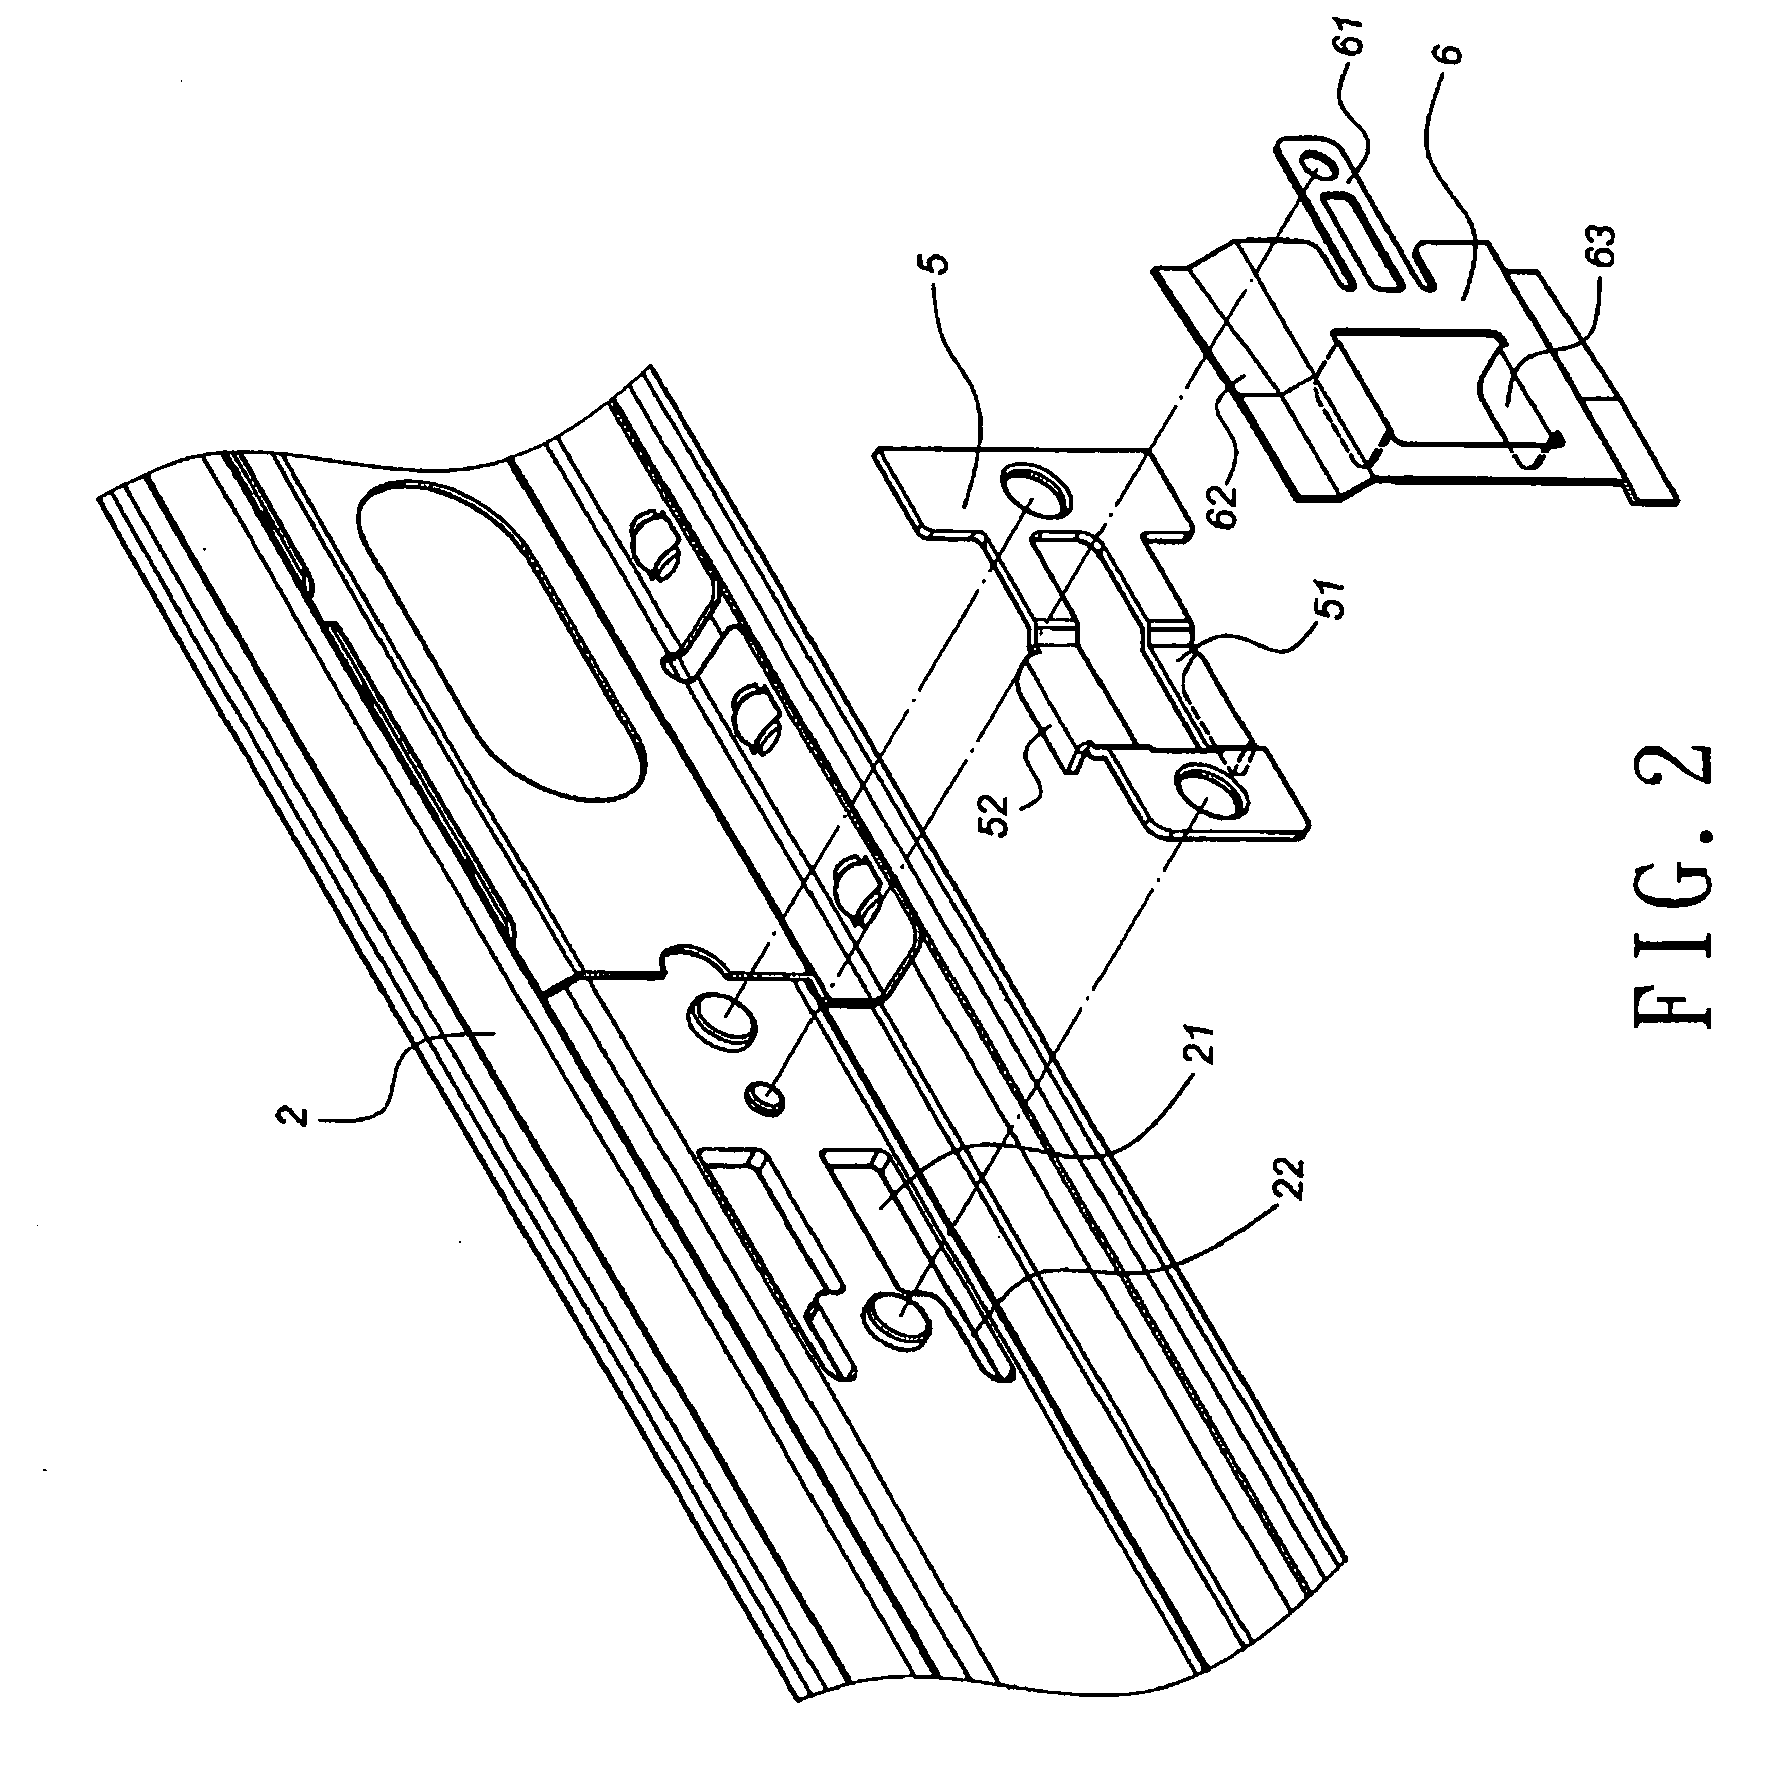 Retaining mechanism for a multi-section slide track assembly